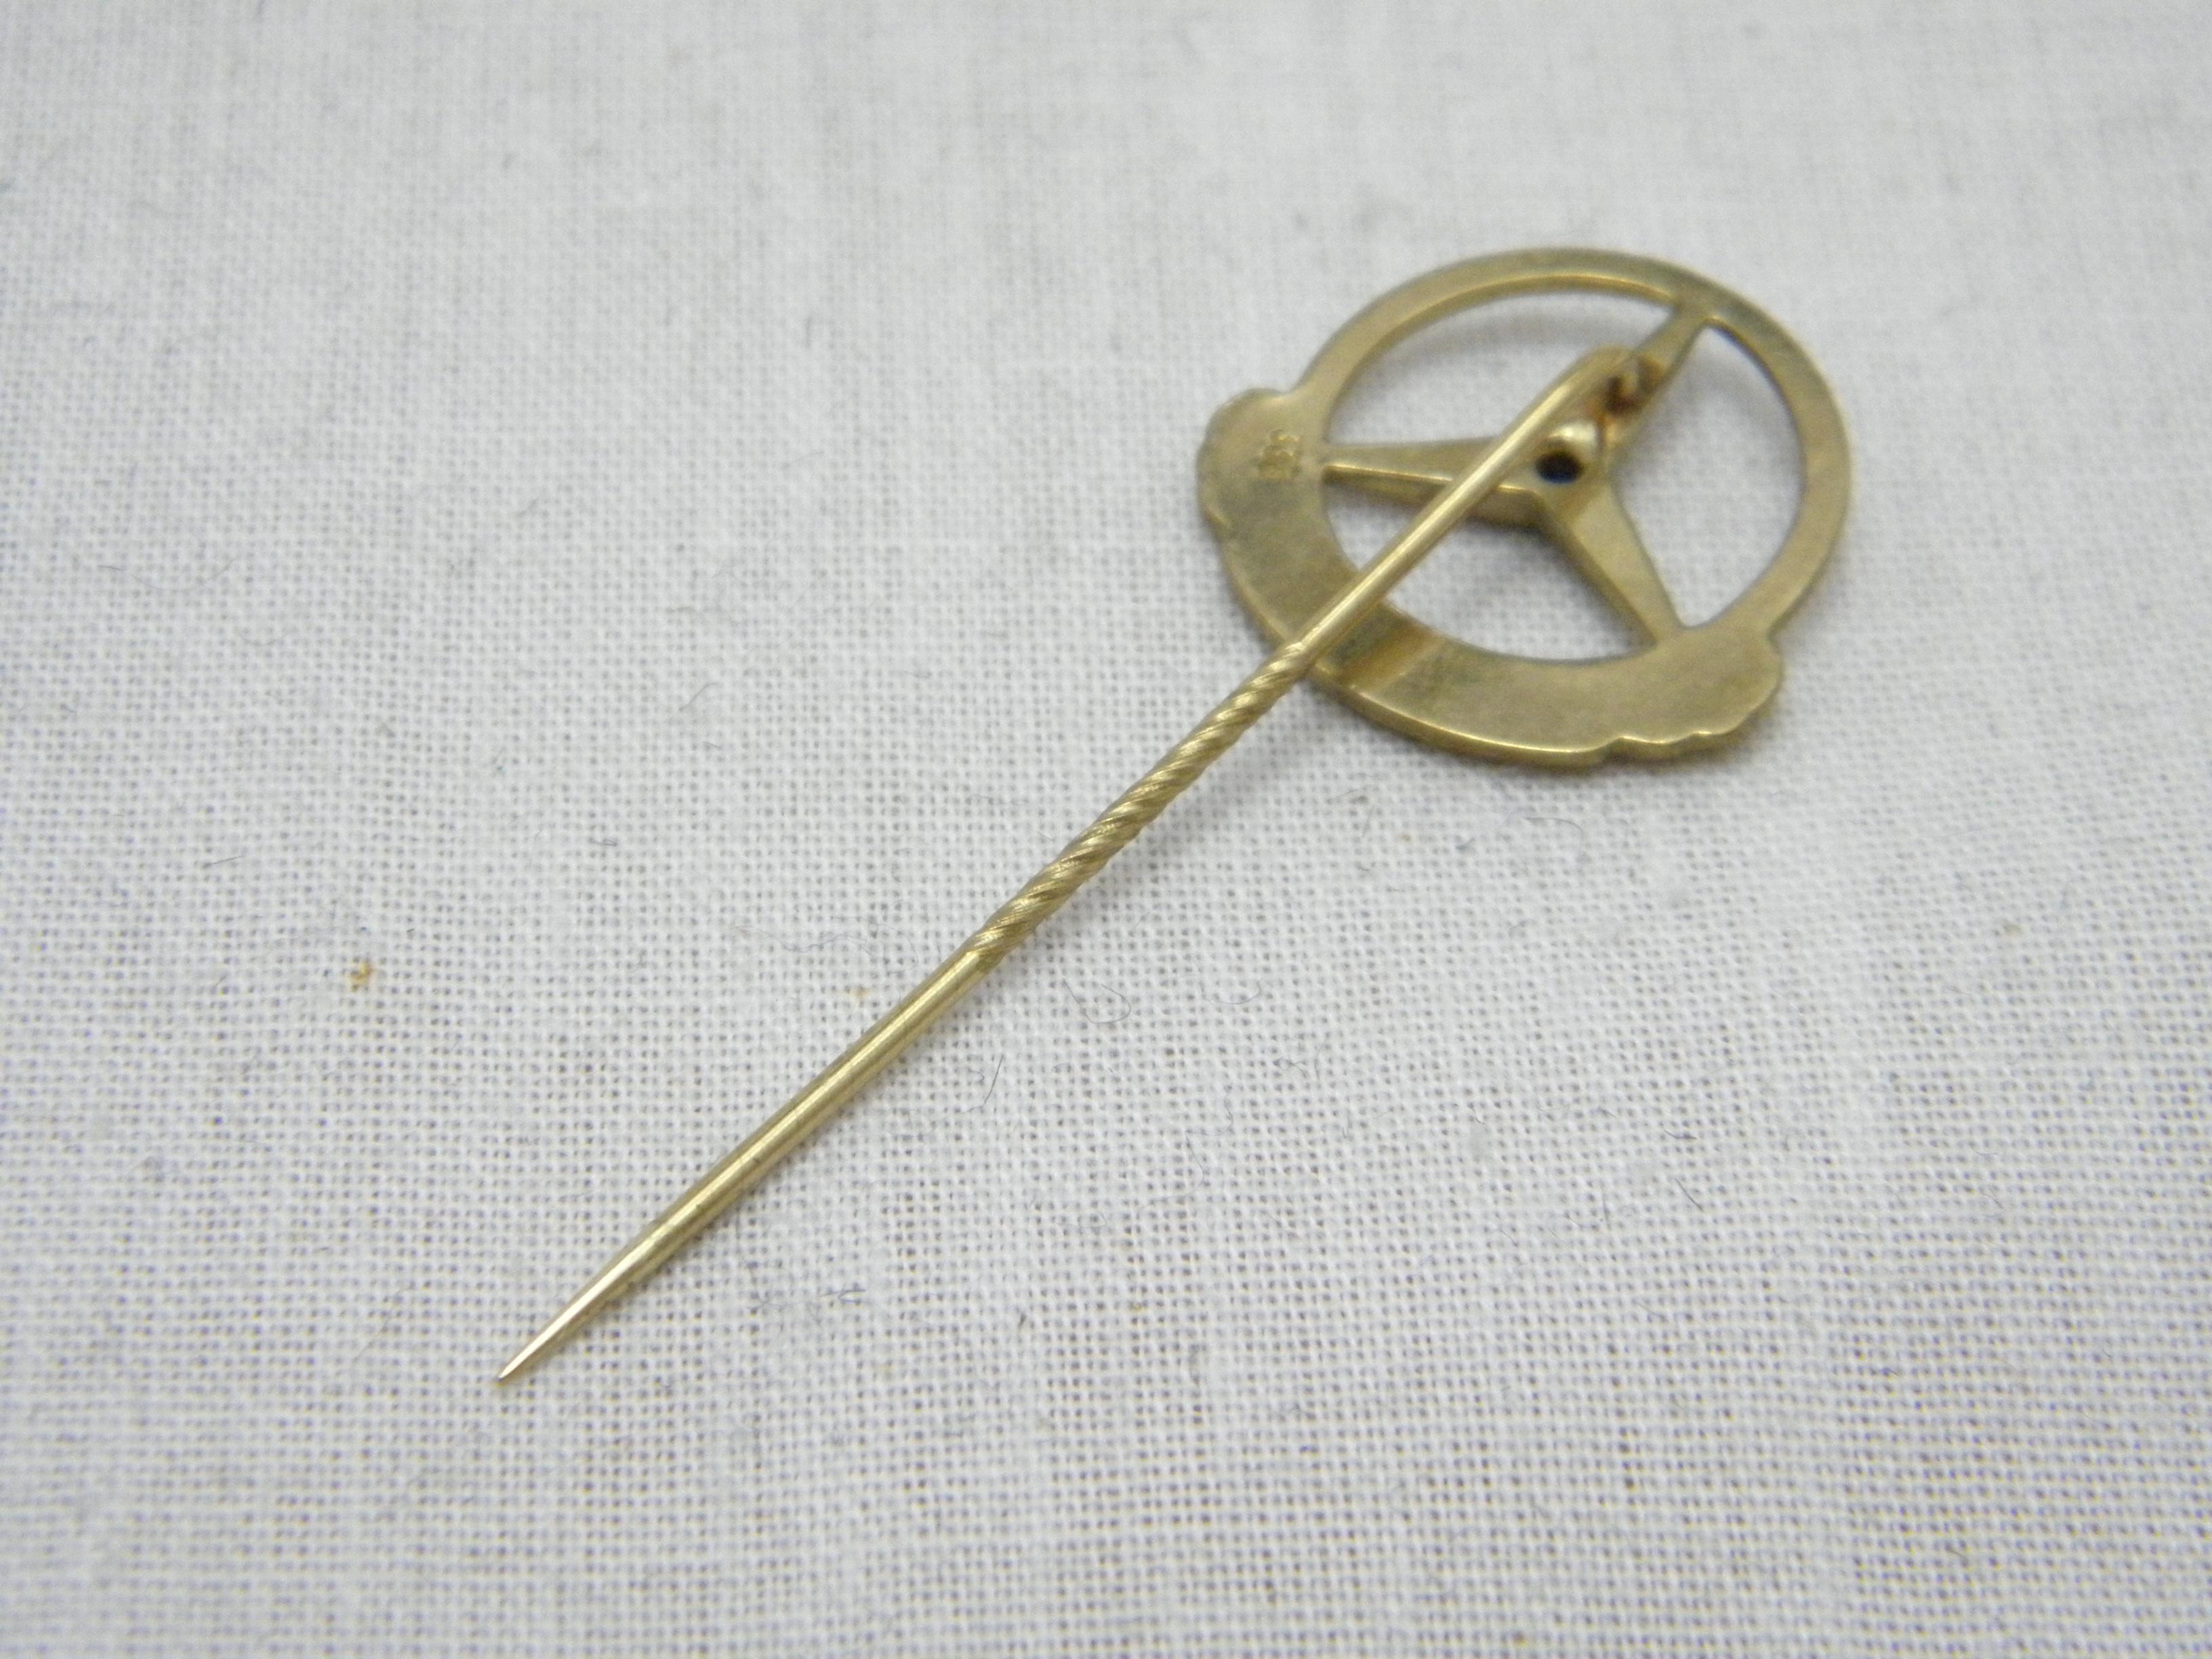 Vintage 8ct Gold Large Sapphire Mercedes Benz Brooch Pin c1960s Heavy 333 Purity In Good Condition For Sale In Camelford, GB